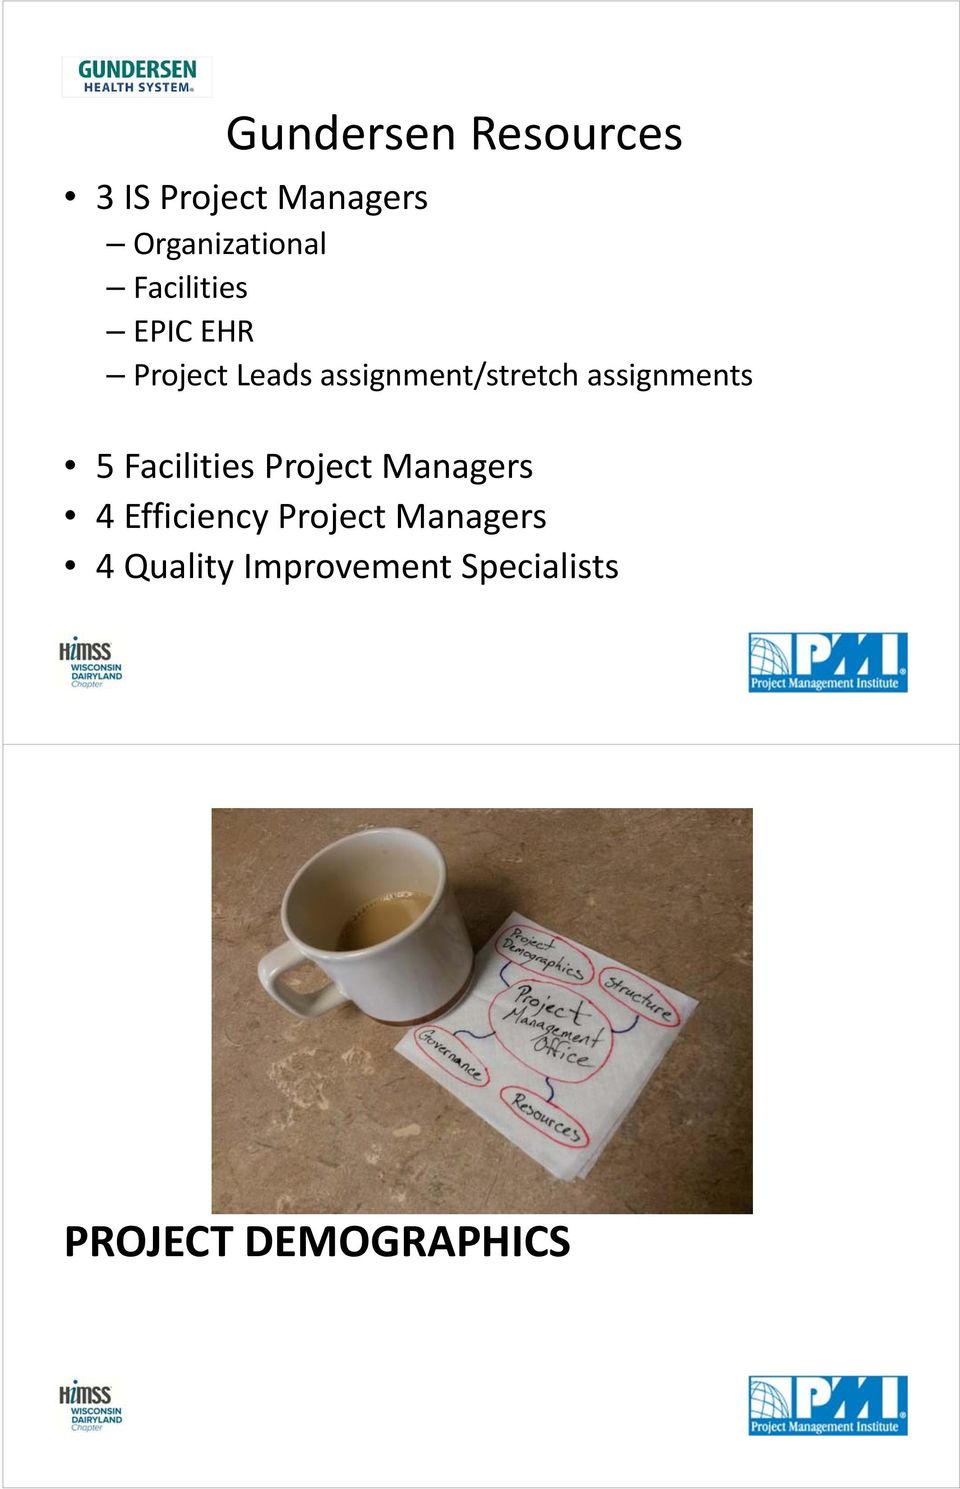 assignments 5 Facilities Project Managers 4 Efficiency